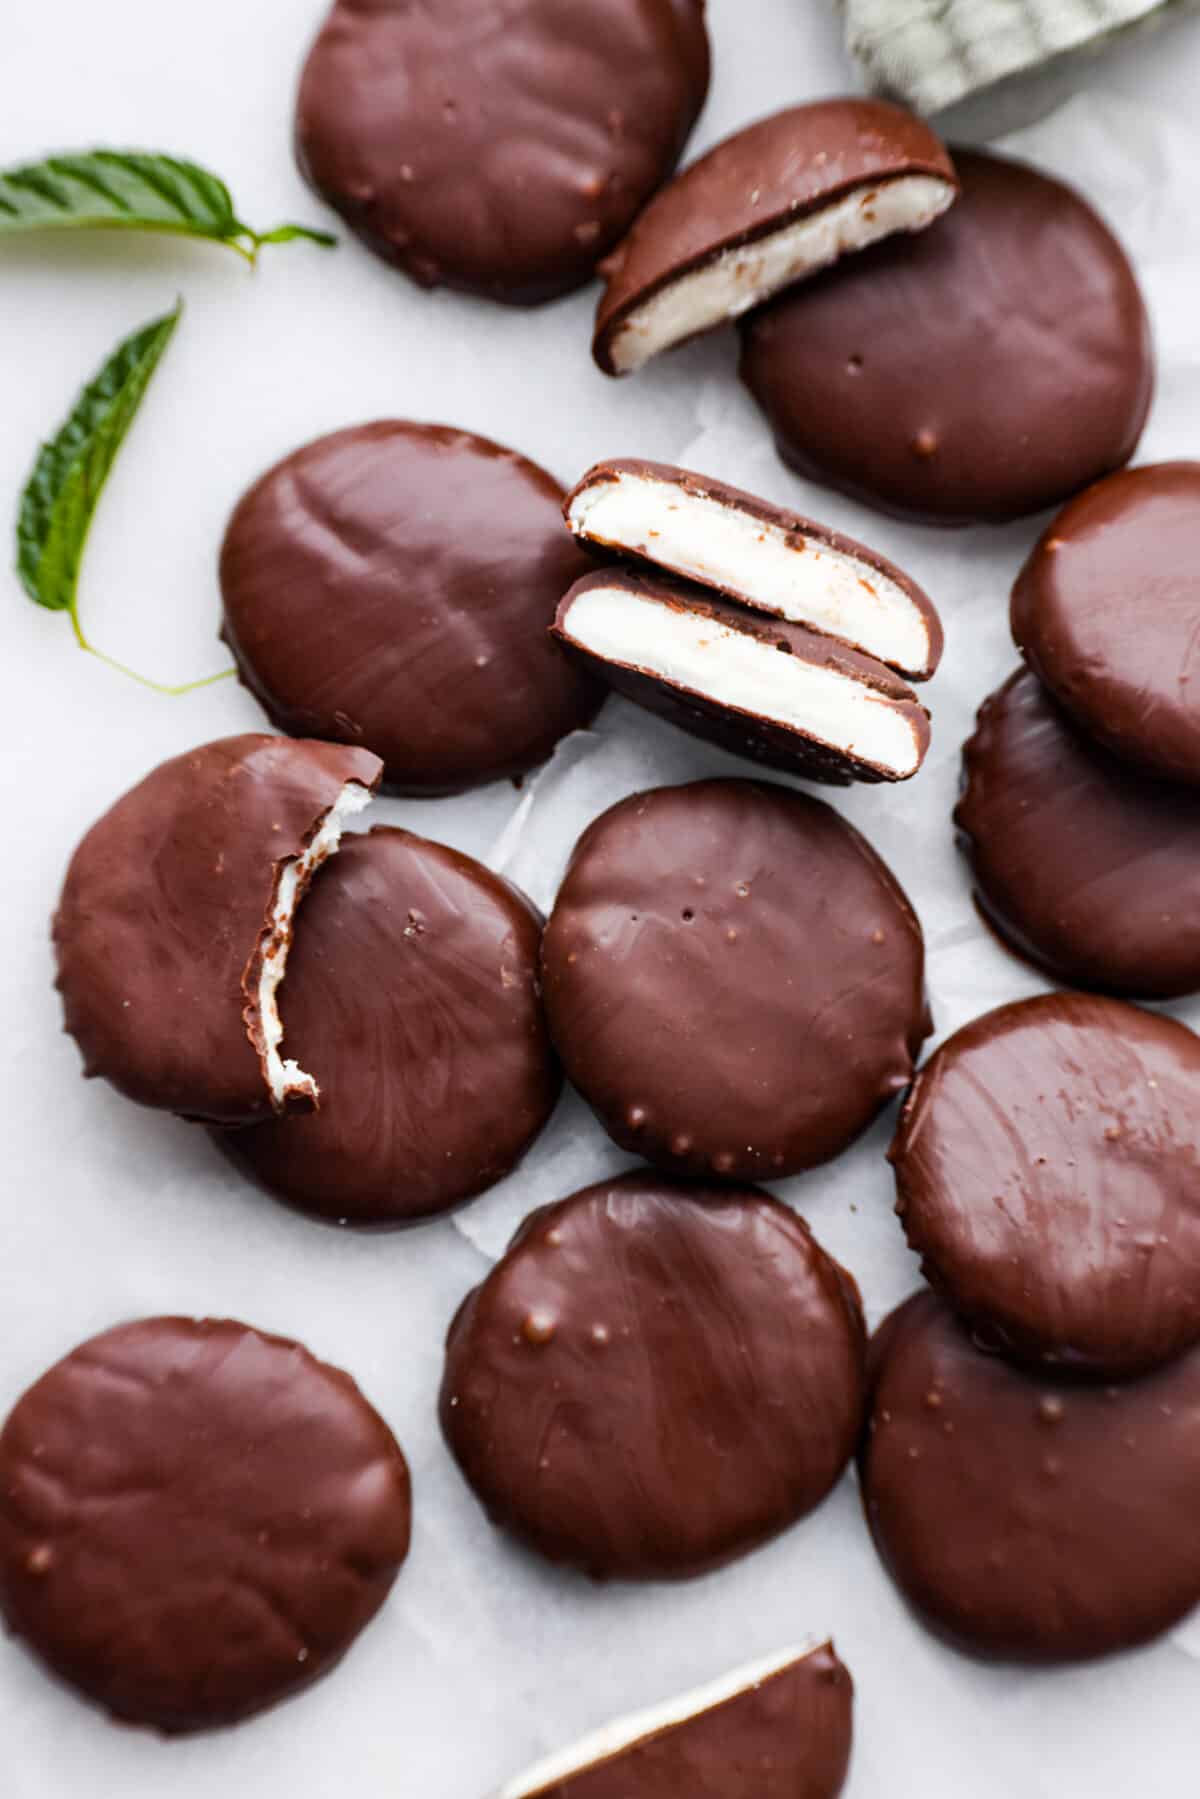 Top-down view of peppermint patties. Some are broken in half so the mint filling can be seen.